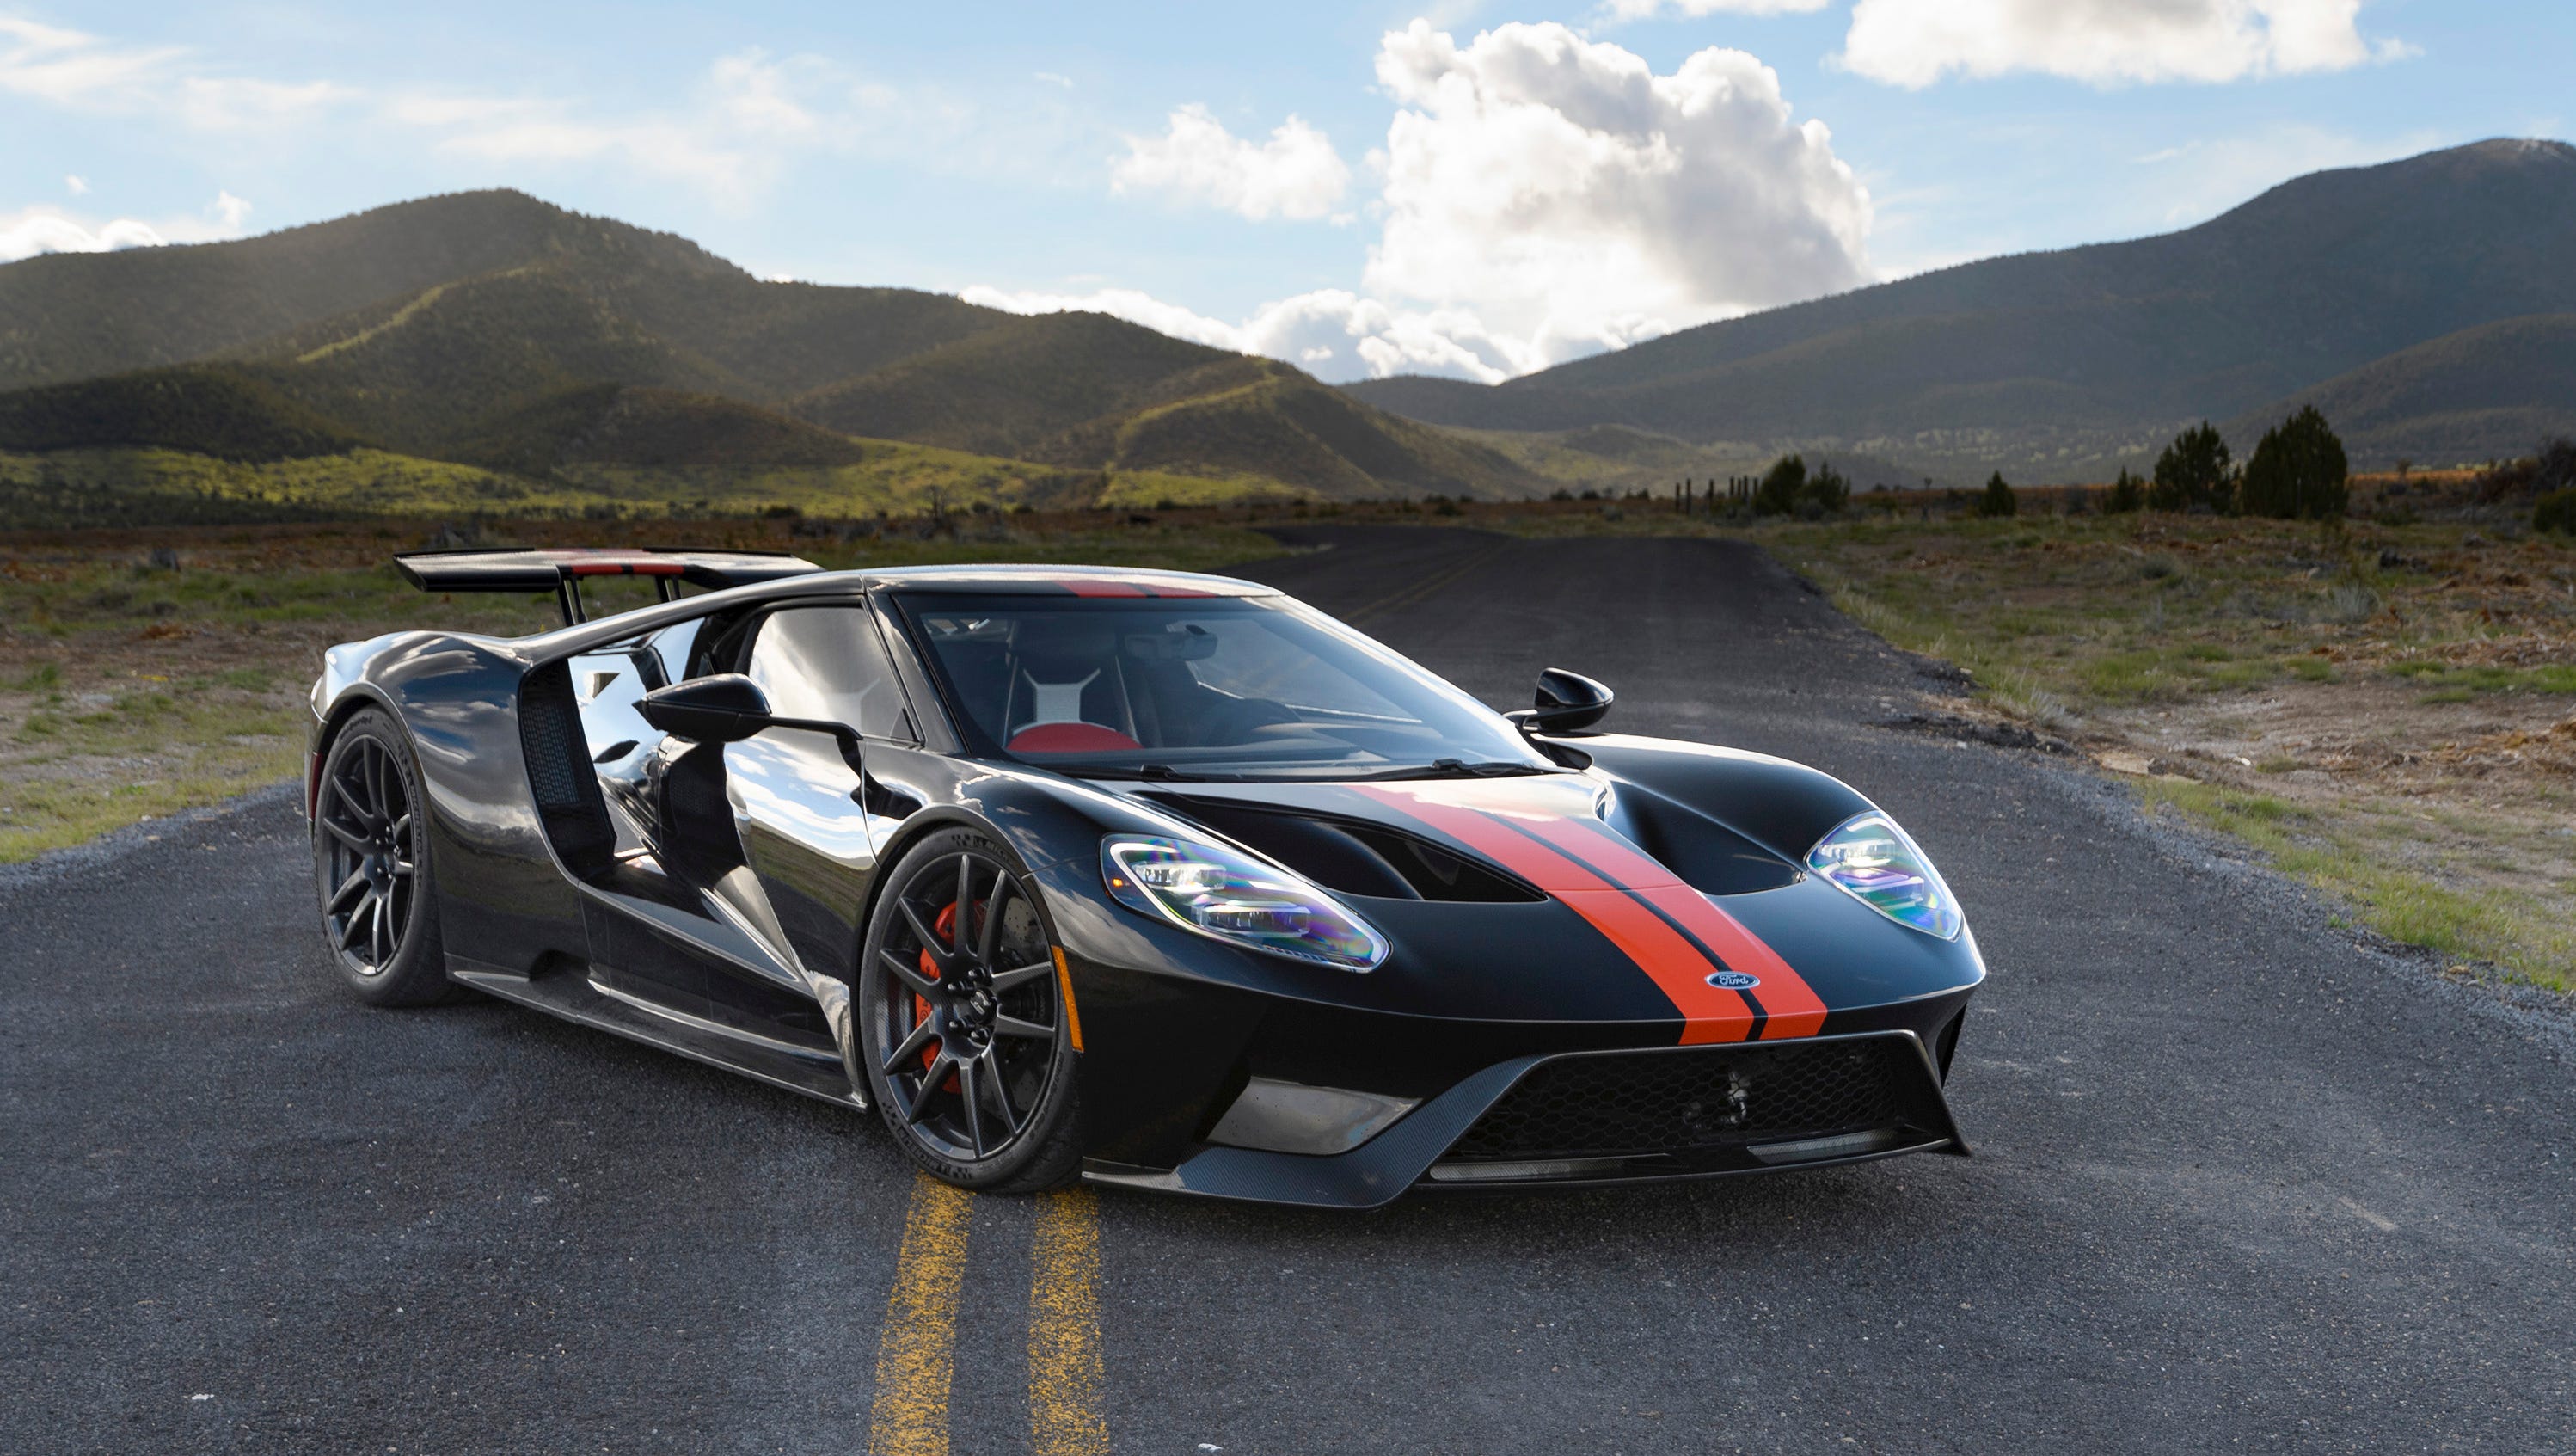 Behind the wheel of the $450,000 Ford GT super car